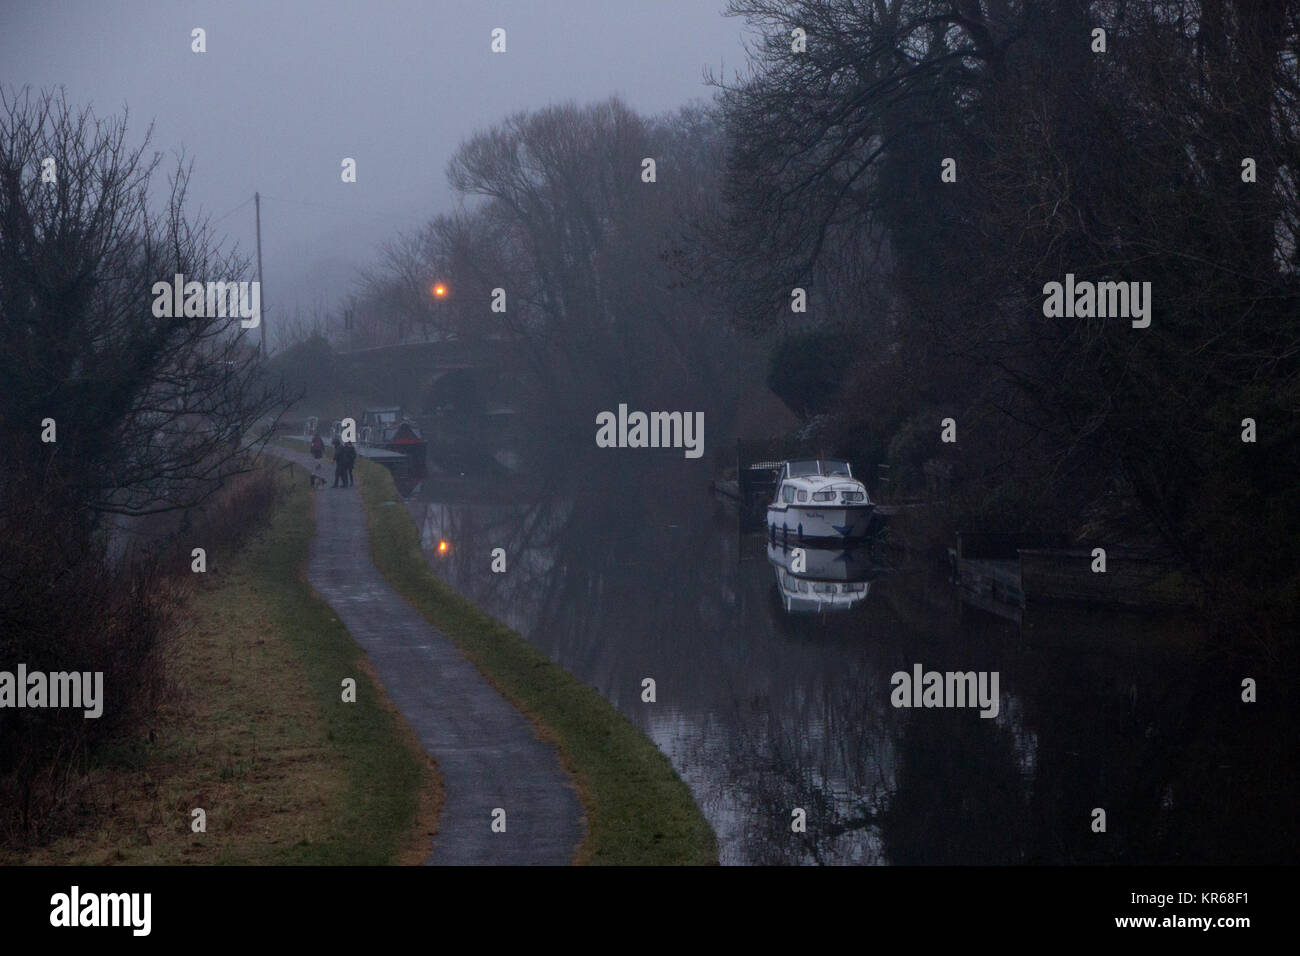 Bolton le sands Lancashire, UK. 19th December, 2017. Looking through the mist and rain down the tow path of the Lancaster Canal at Bolton le Sands Credit: David Billinge/Alamy Live News Stock Photo